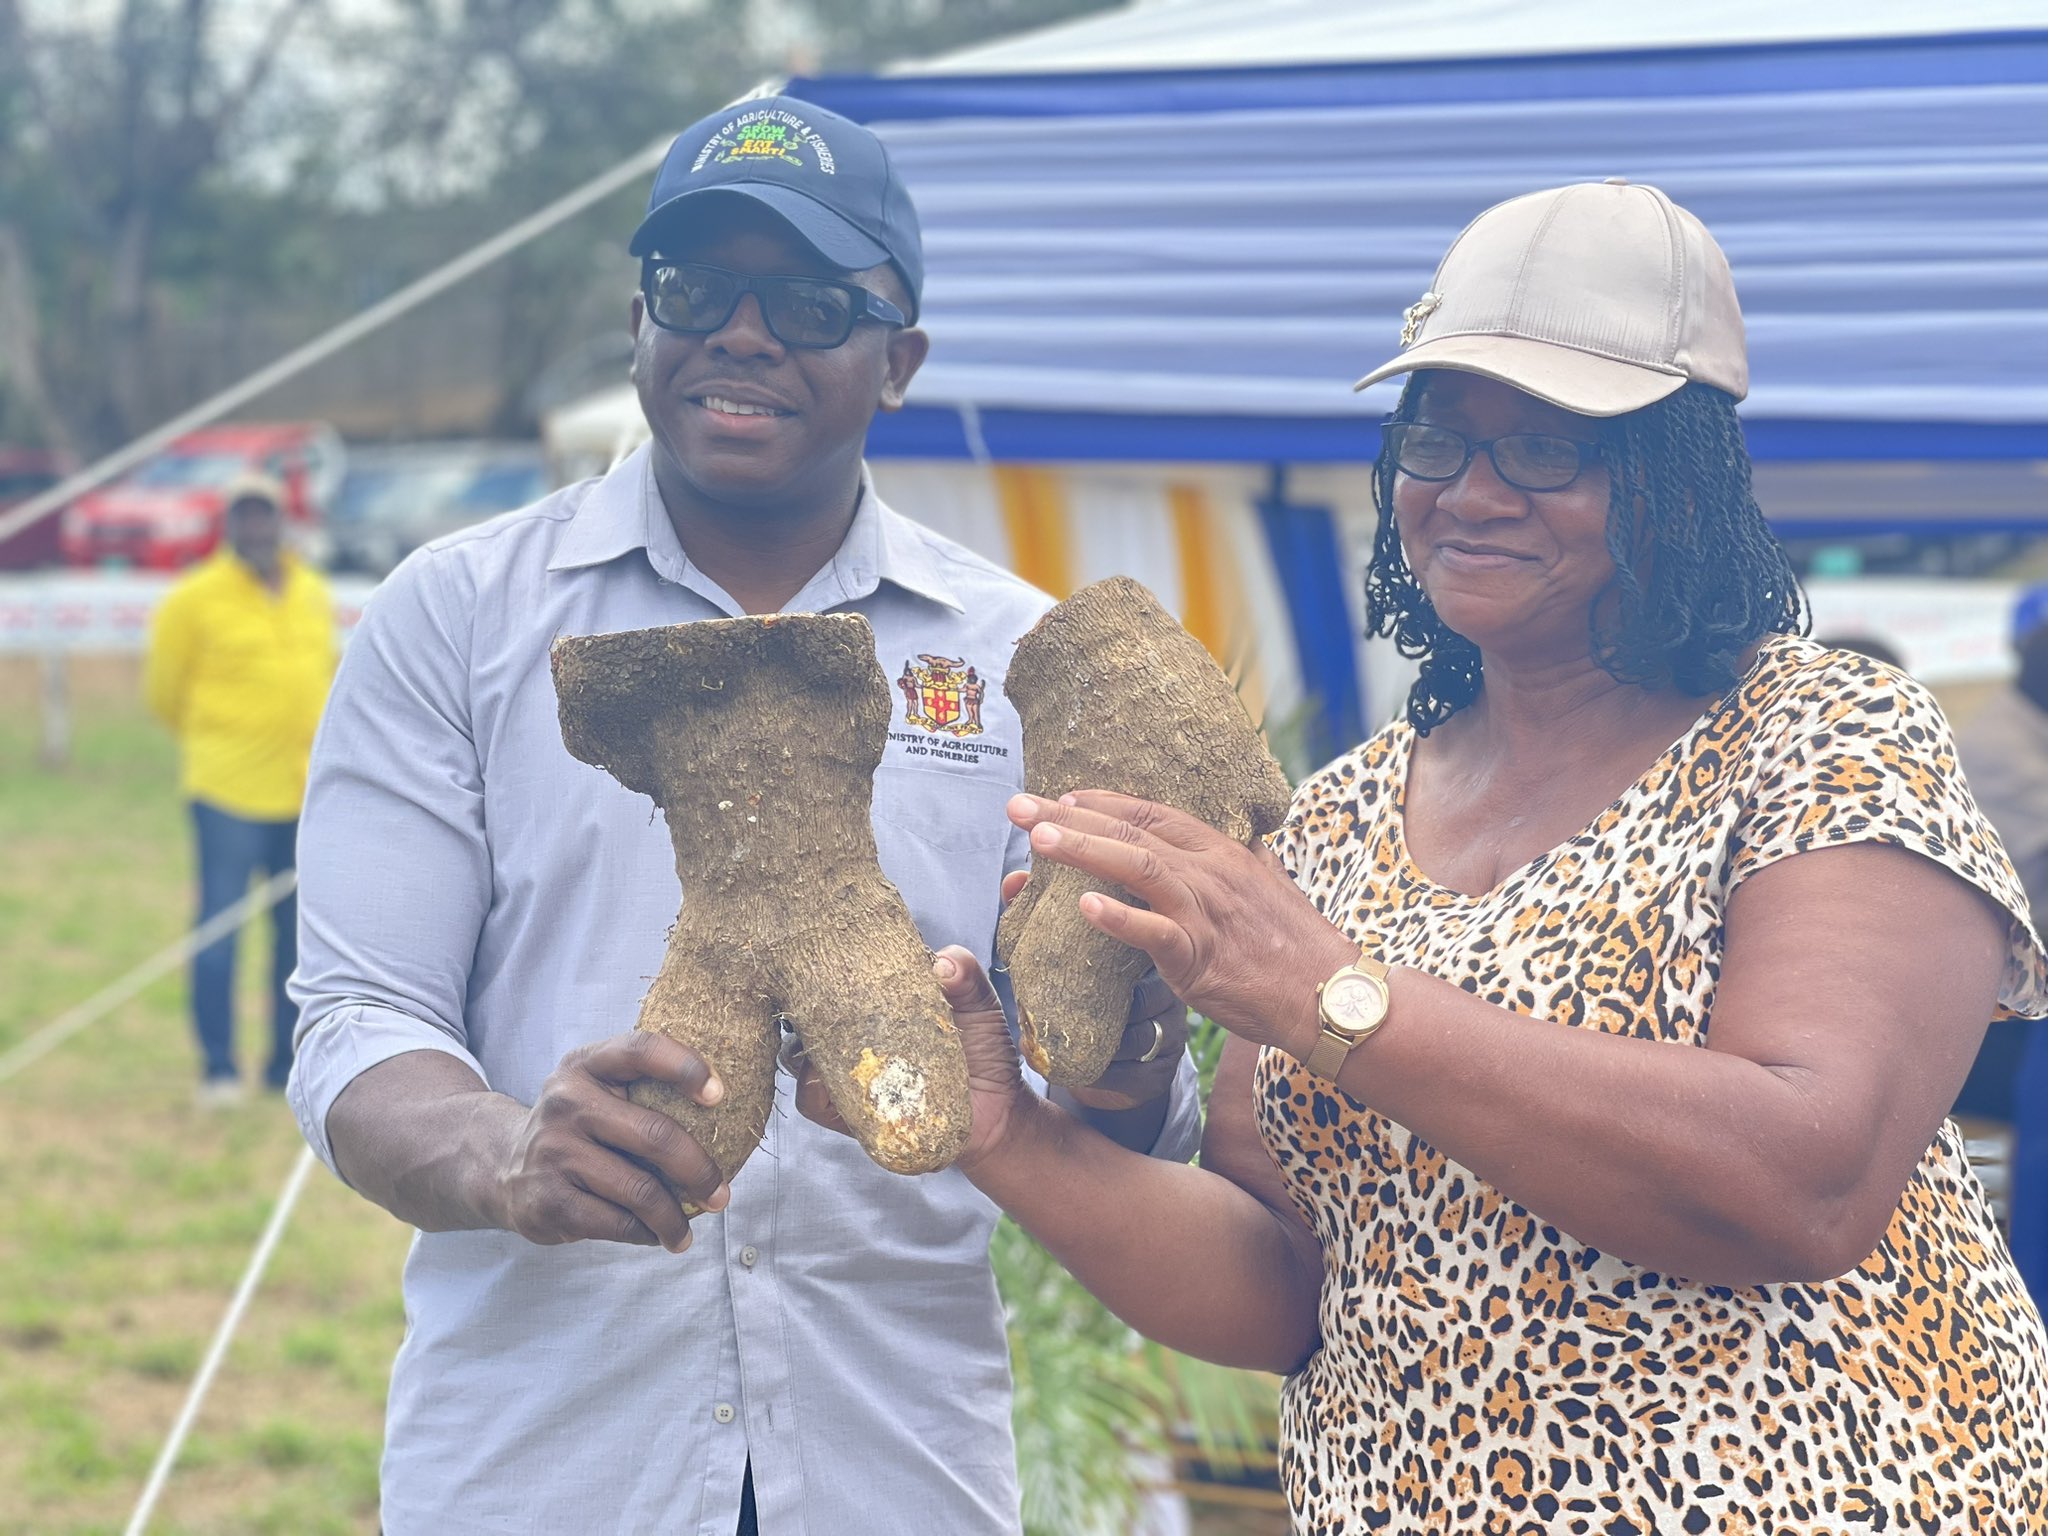 Trelawny Is Jamaica's 'Yam Belt' And Where Yam Legends Are Made